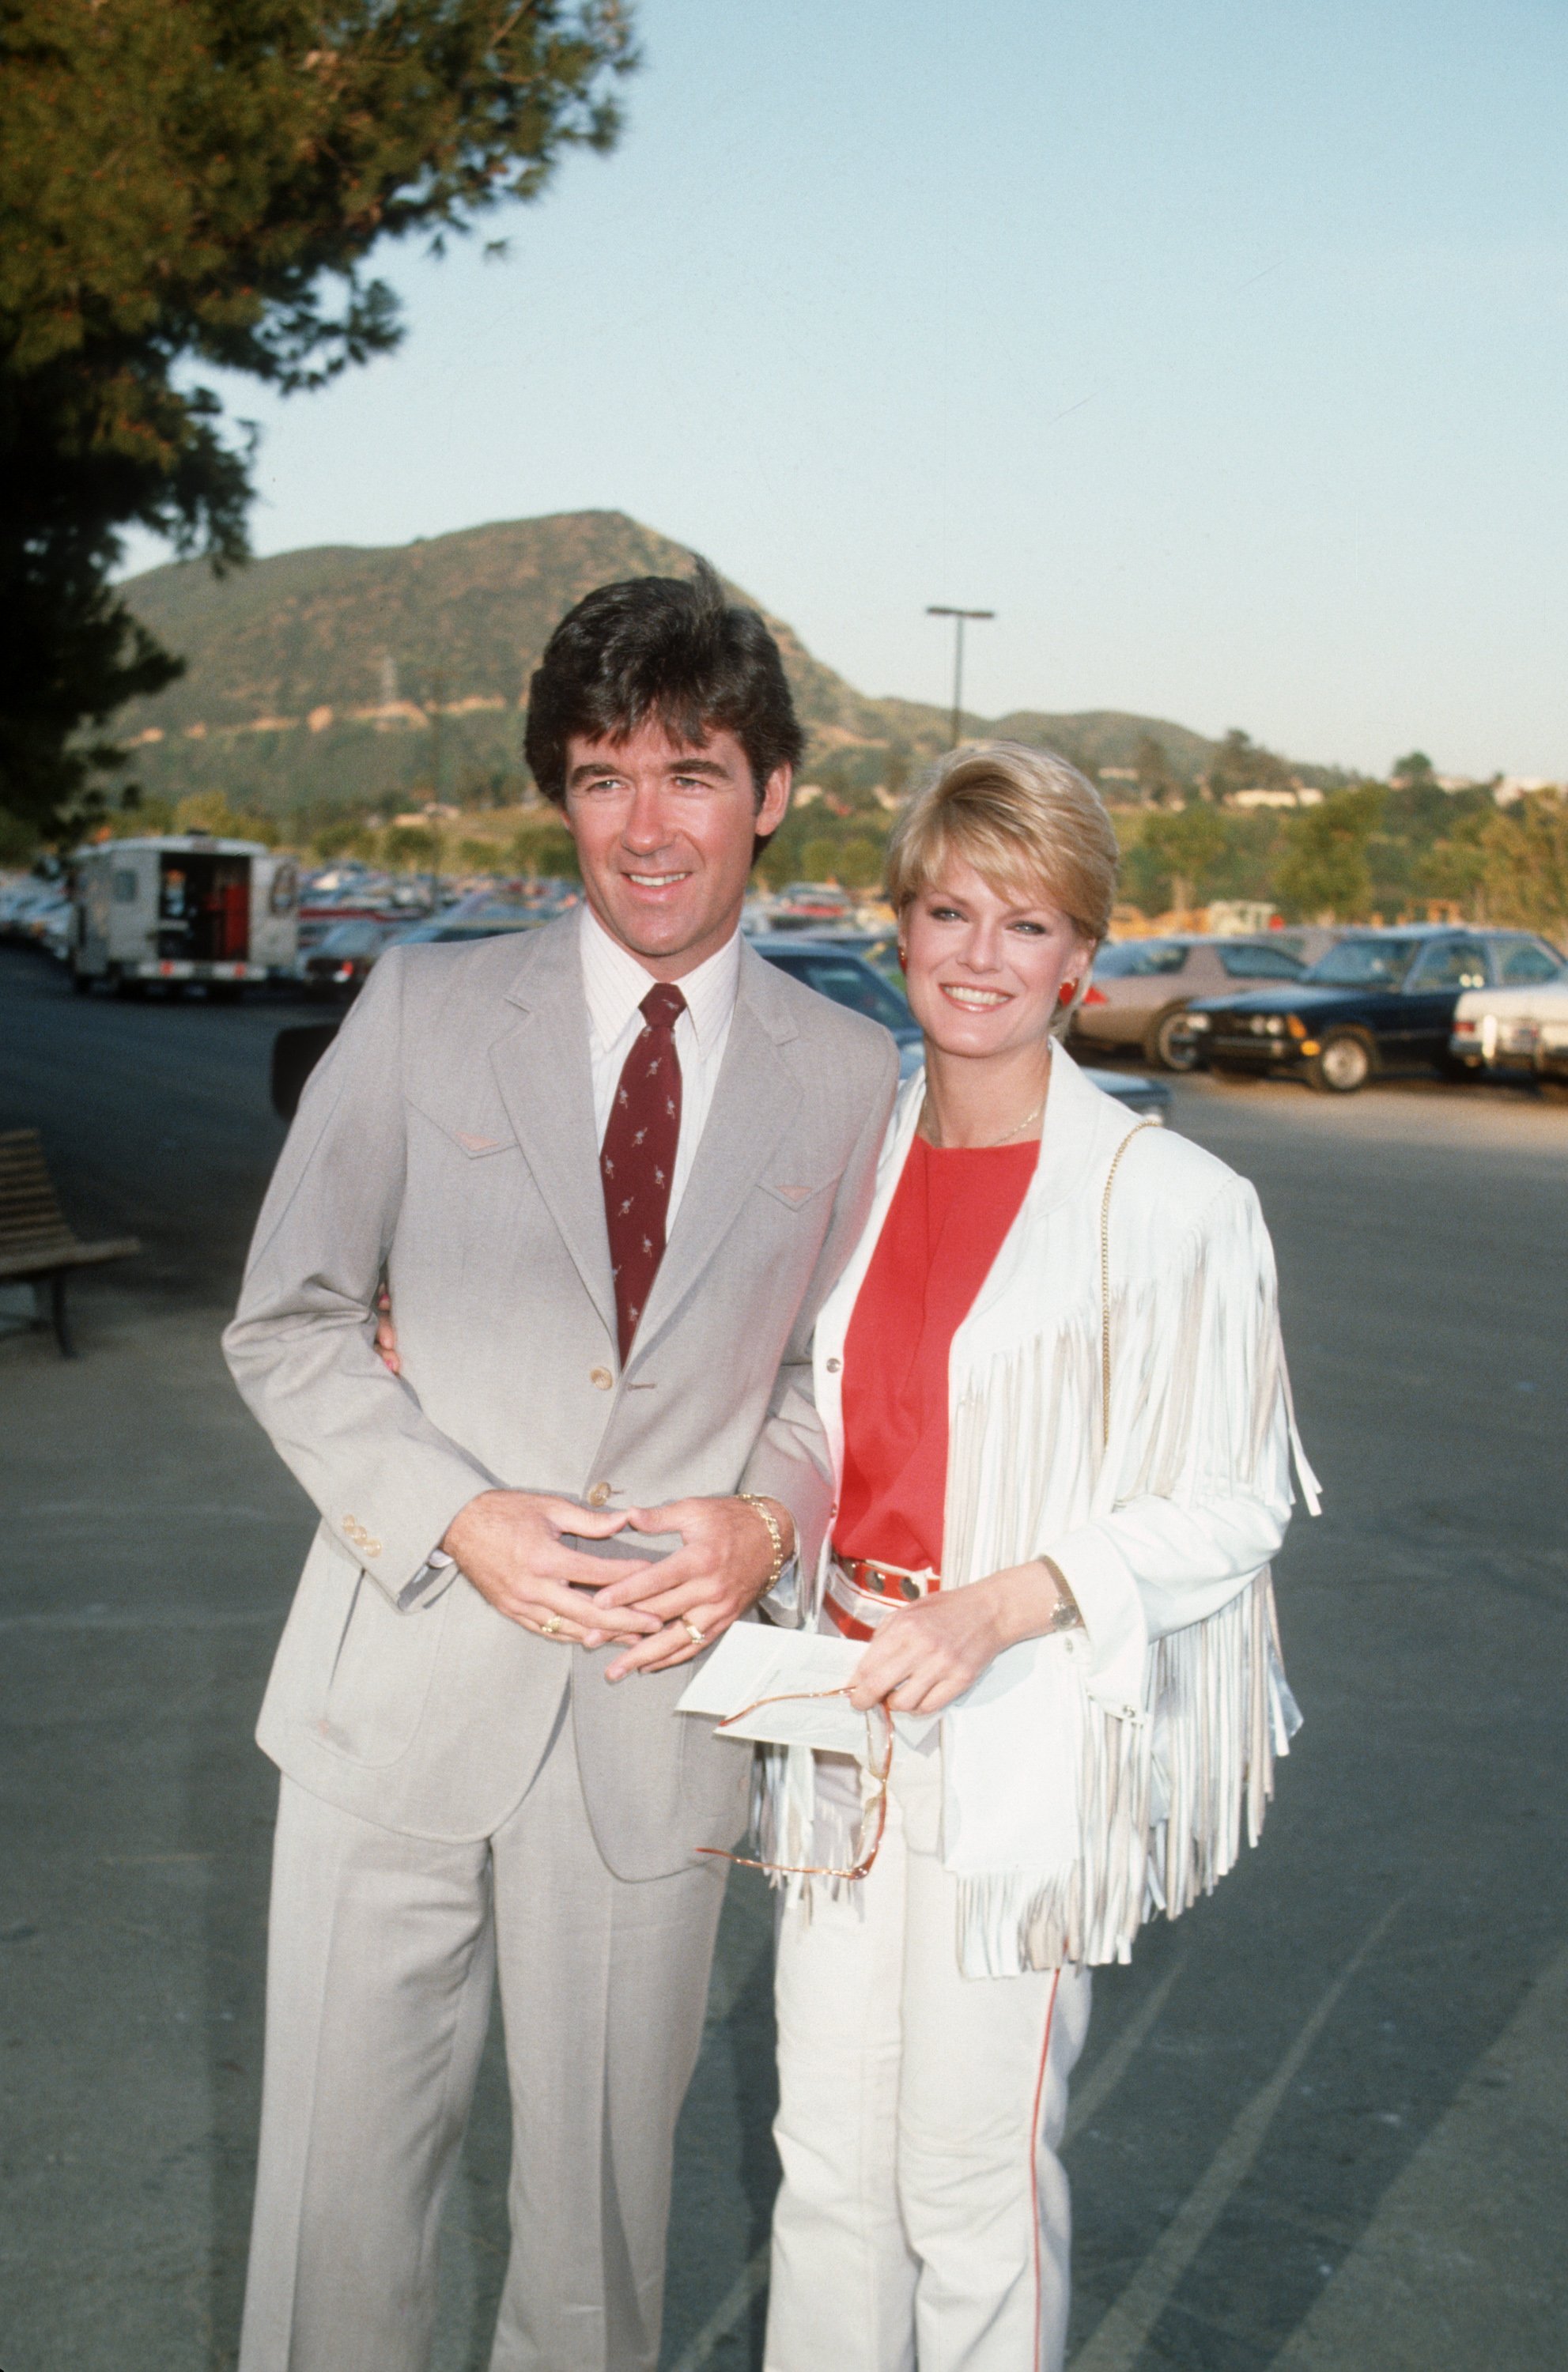 Alan Thicke Gloria Loring attending 'Share Boomtown Party, May 1983 | Source: Getty Images